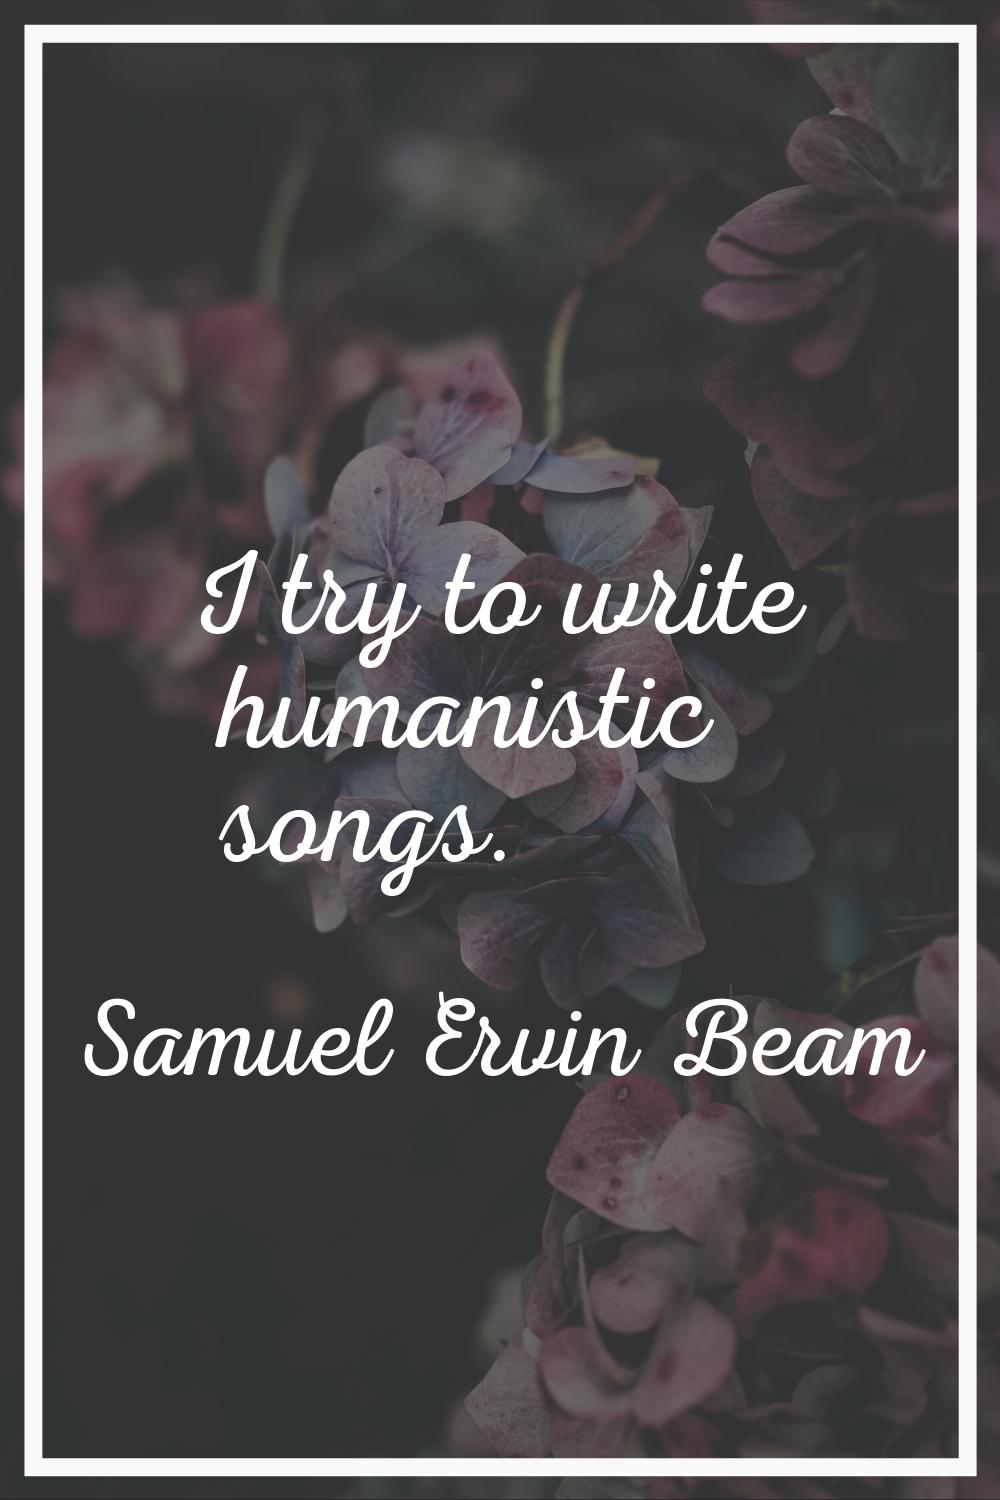 I try to write humanistic songs.